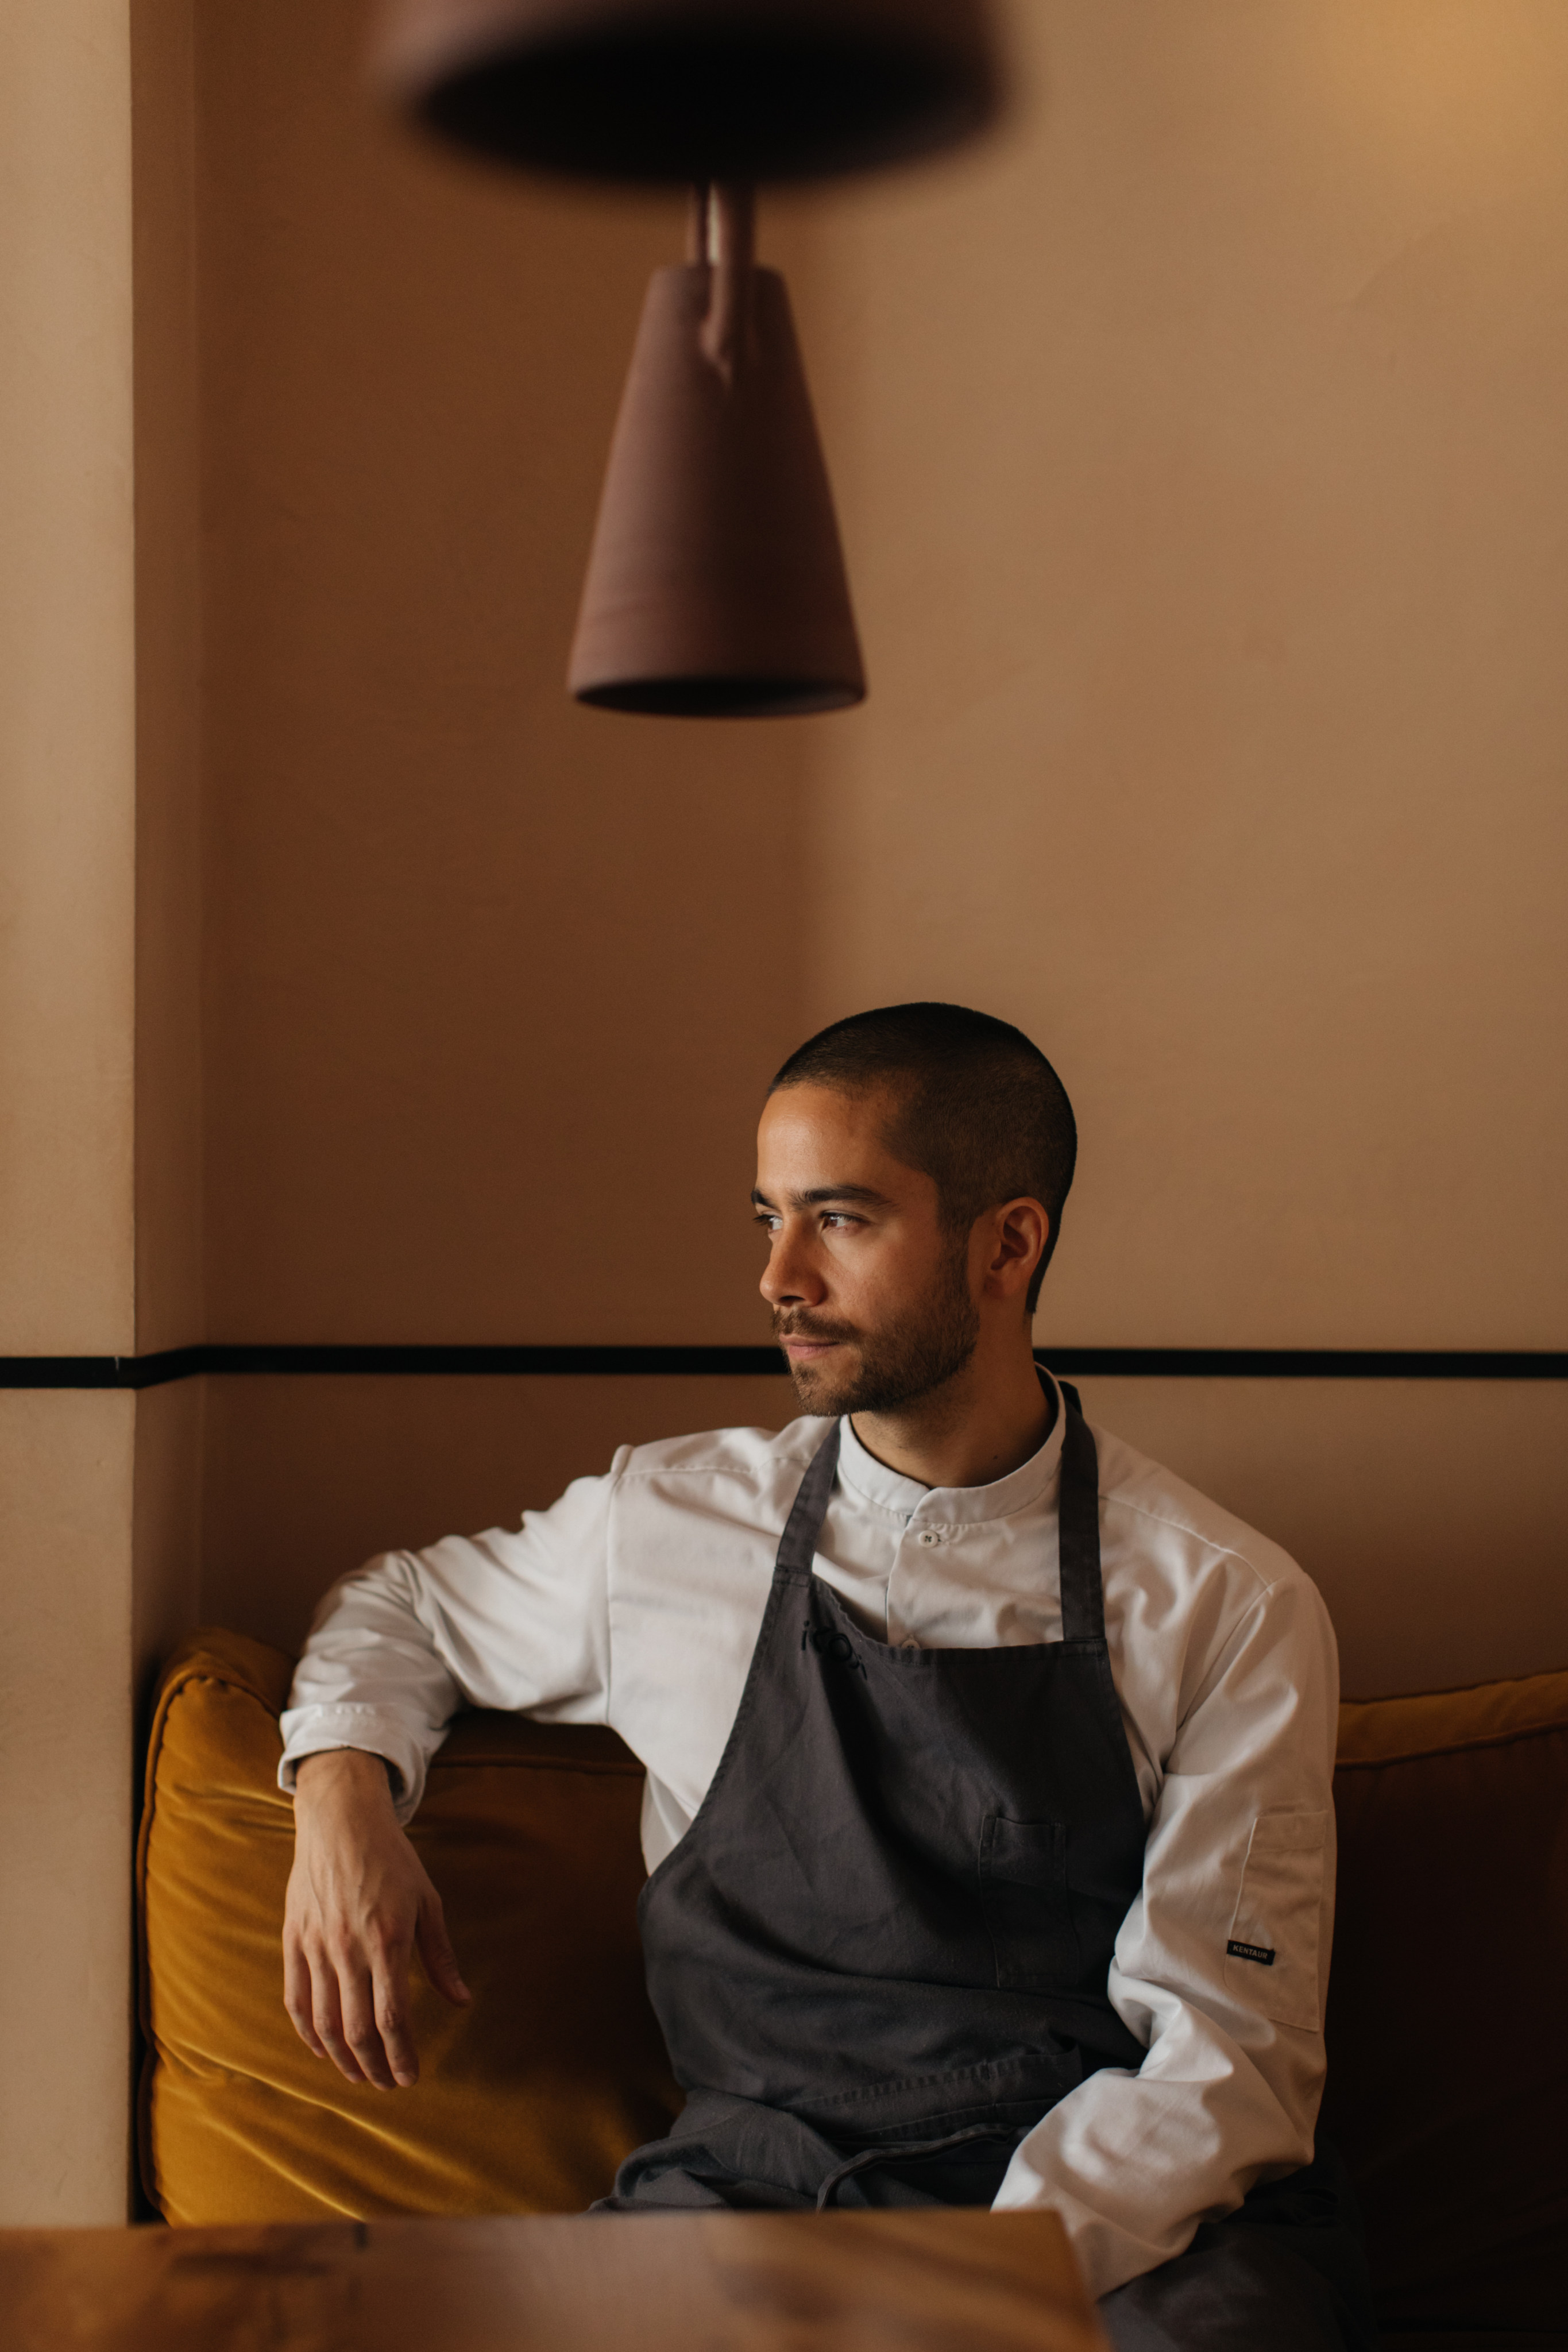 Jeremy Chan has been called ‘Britain’s most creative chef’, and from the menu at his two-Michelin-star London restaurant Ikoyi, it’s not hard to see why. Photo: Ikoyi